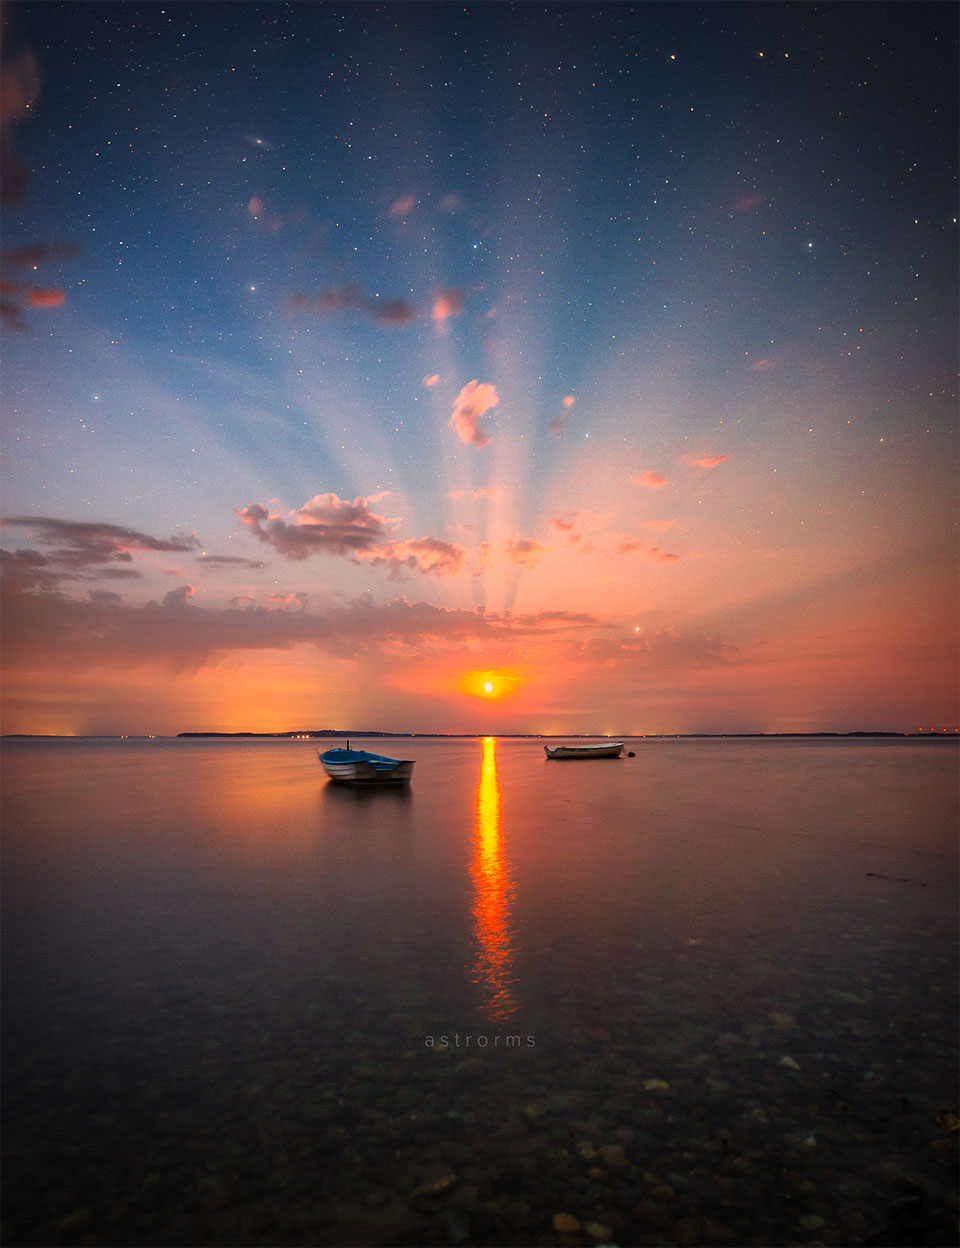 The featured image shows the Moon rising over water surrounded by
bright rays that peek through clouds. 
Please see the explanation for more detailed information.